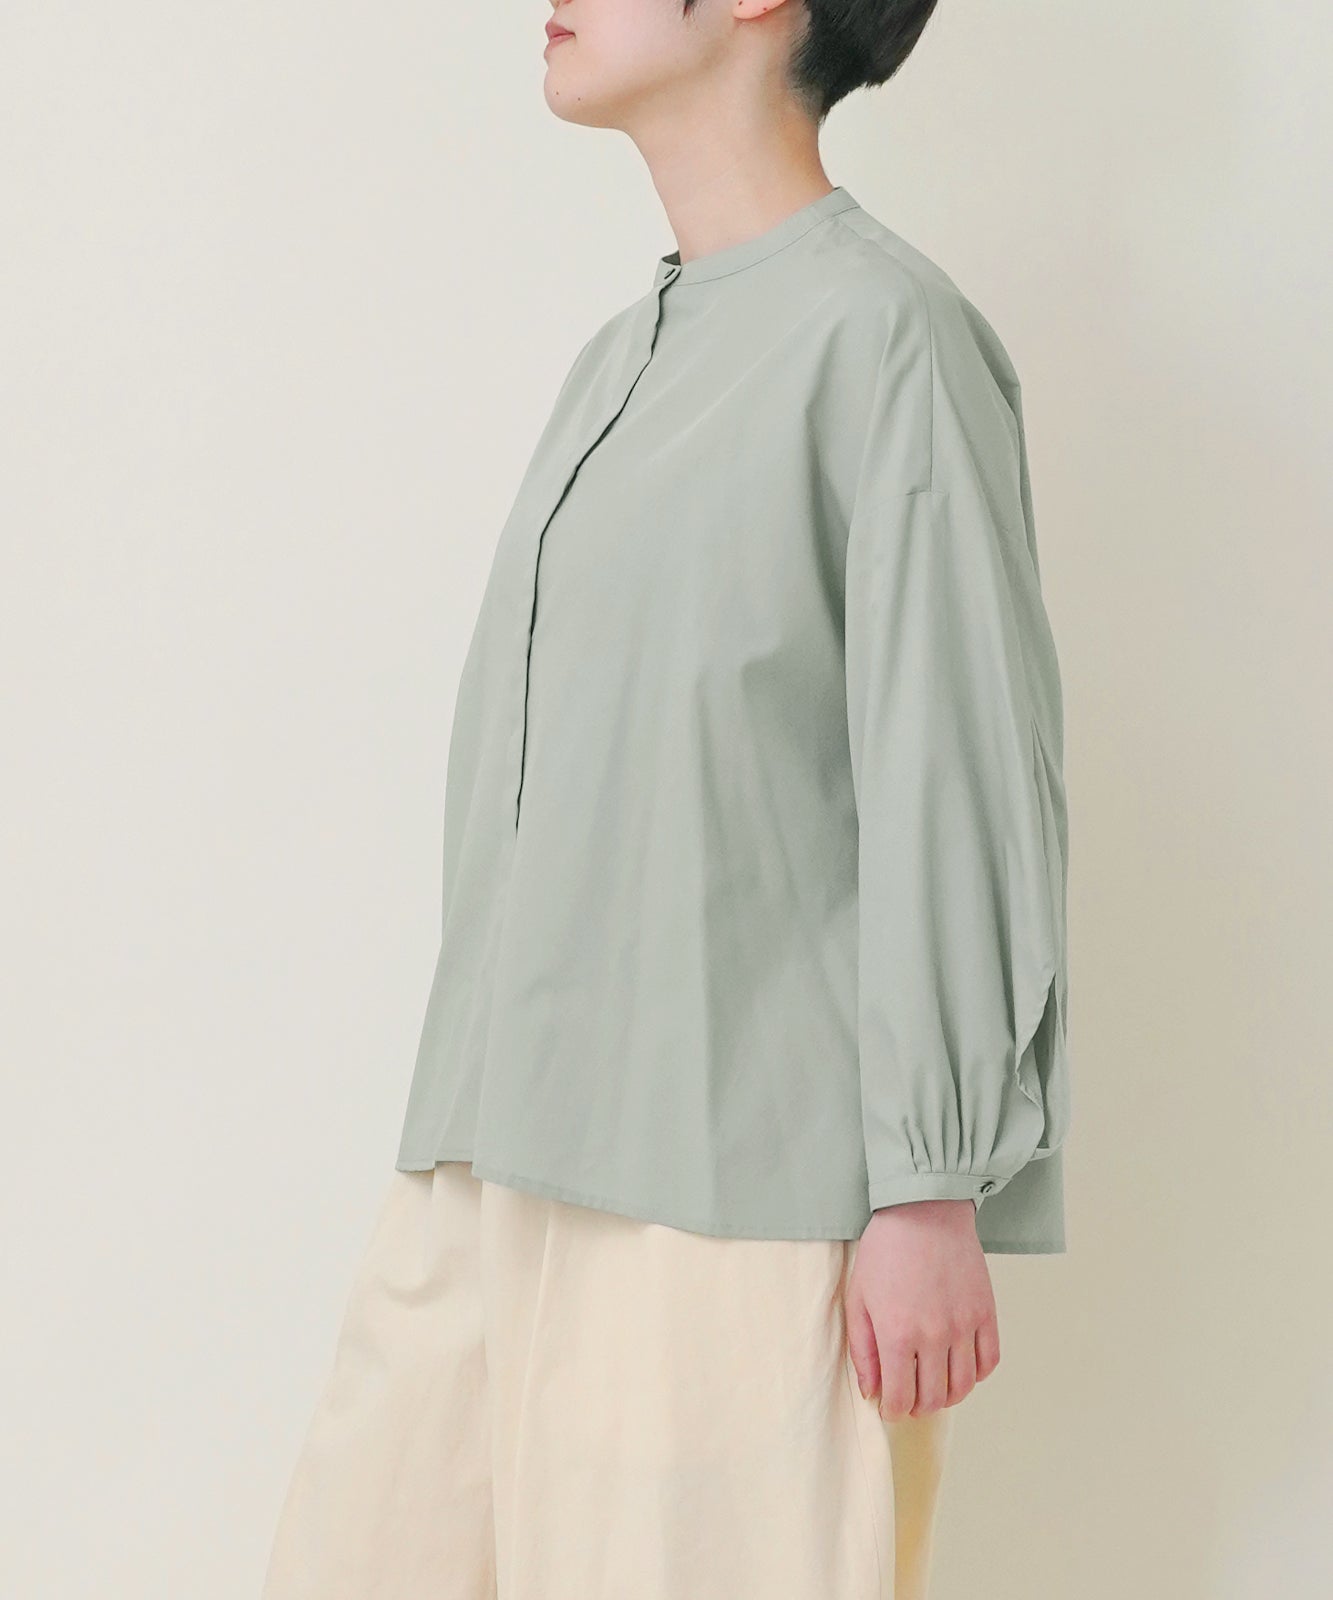 Tucked-in stand-up collar shirt, extra-long staple typewriter cotton